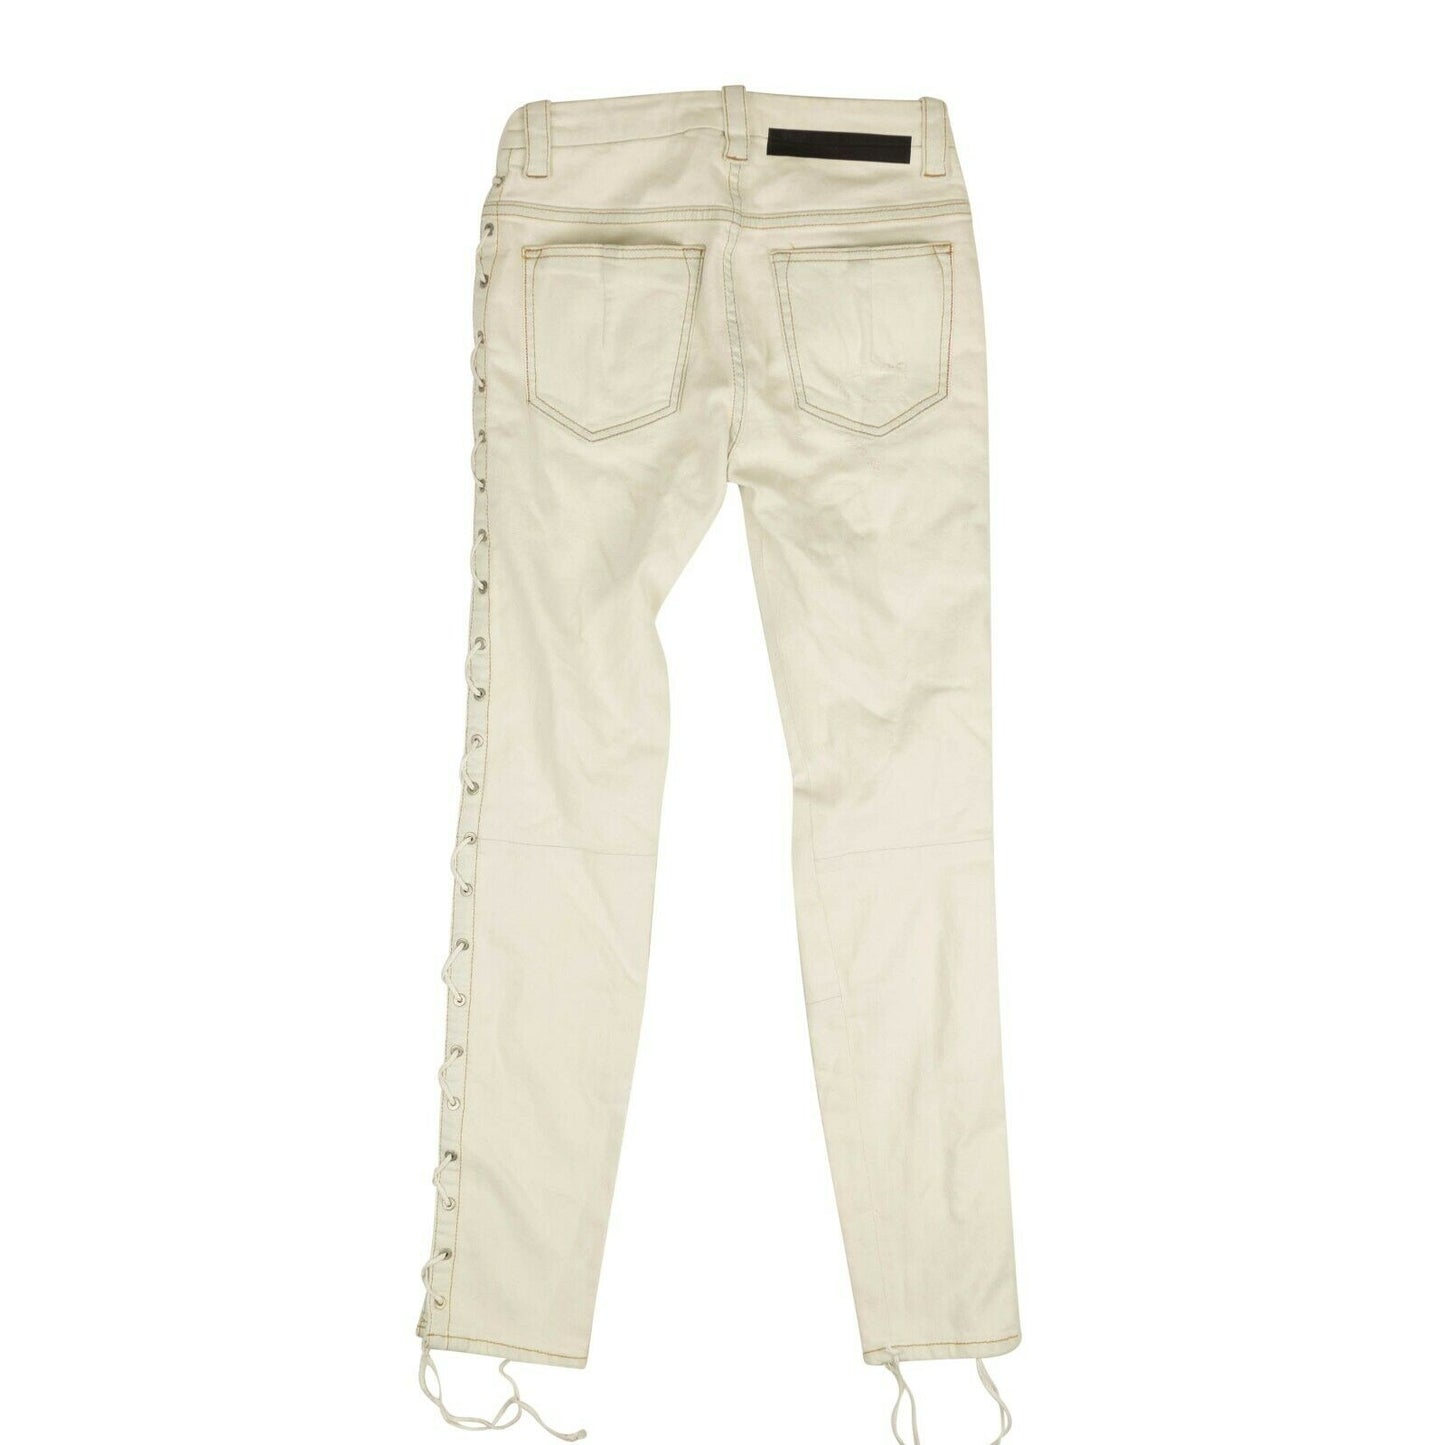 Unravel Project Washout Denim Side Lace Up Skinny Jeans - White